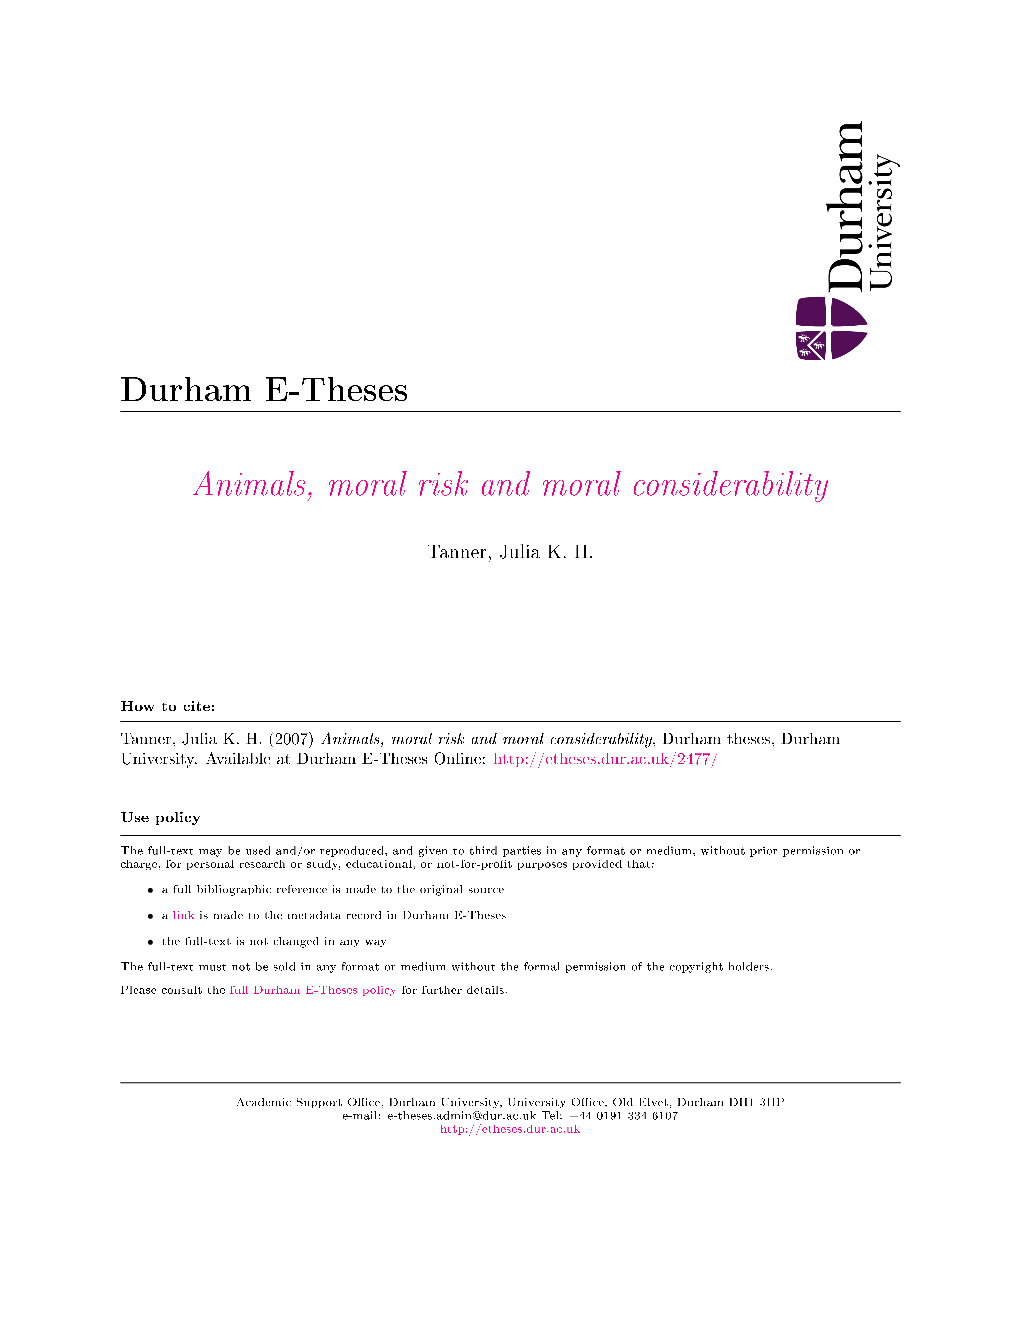 Animals, Moral Risk and Moral Considerability